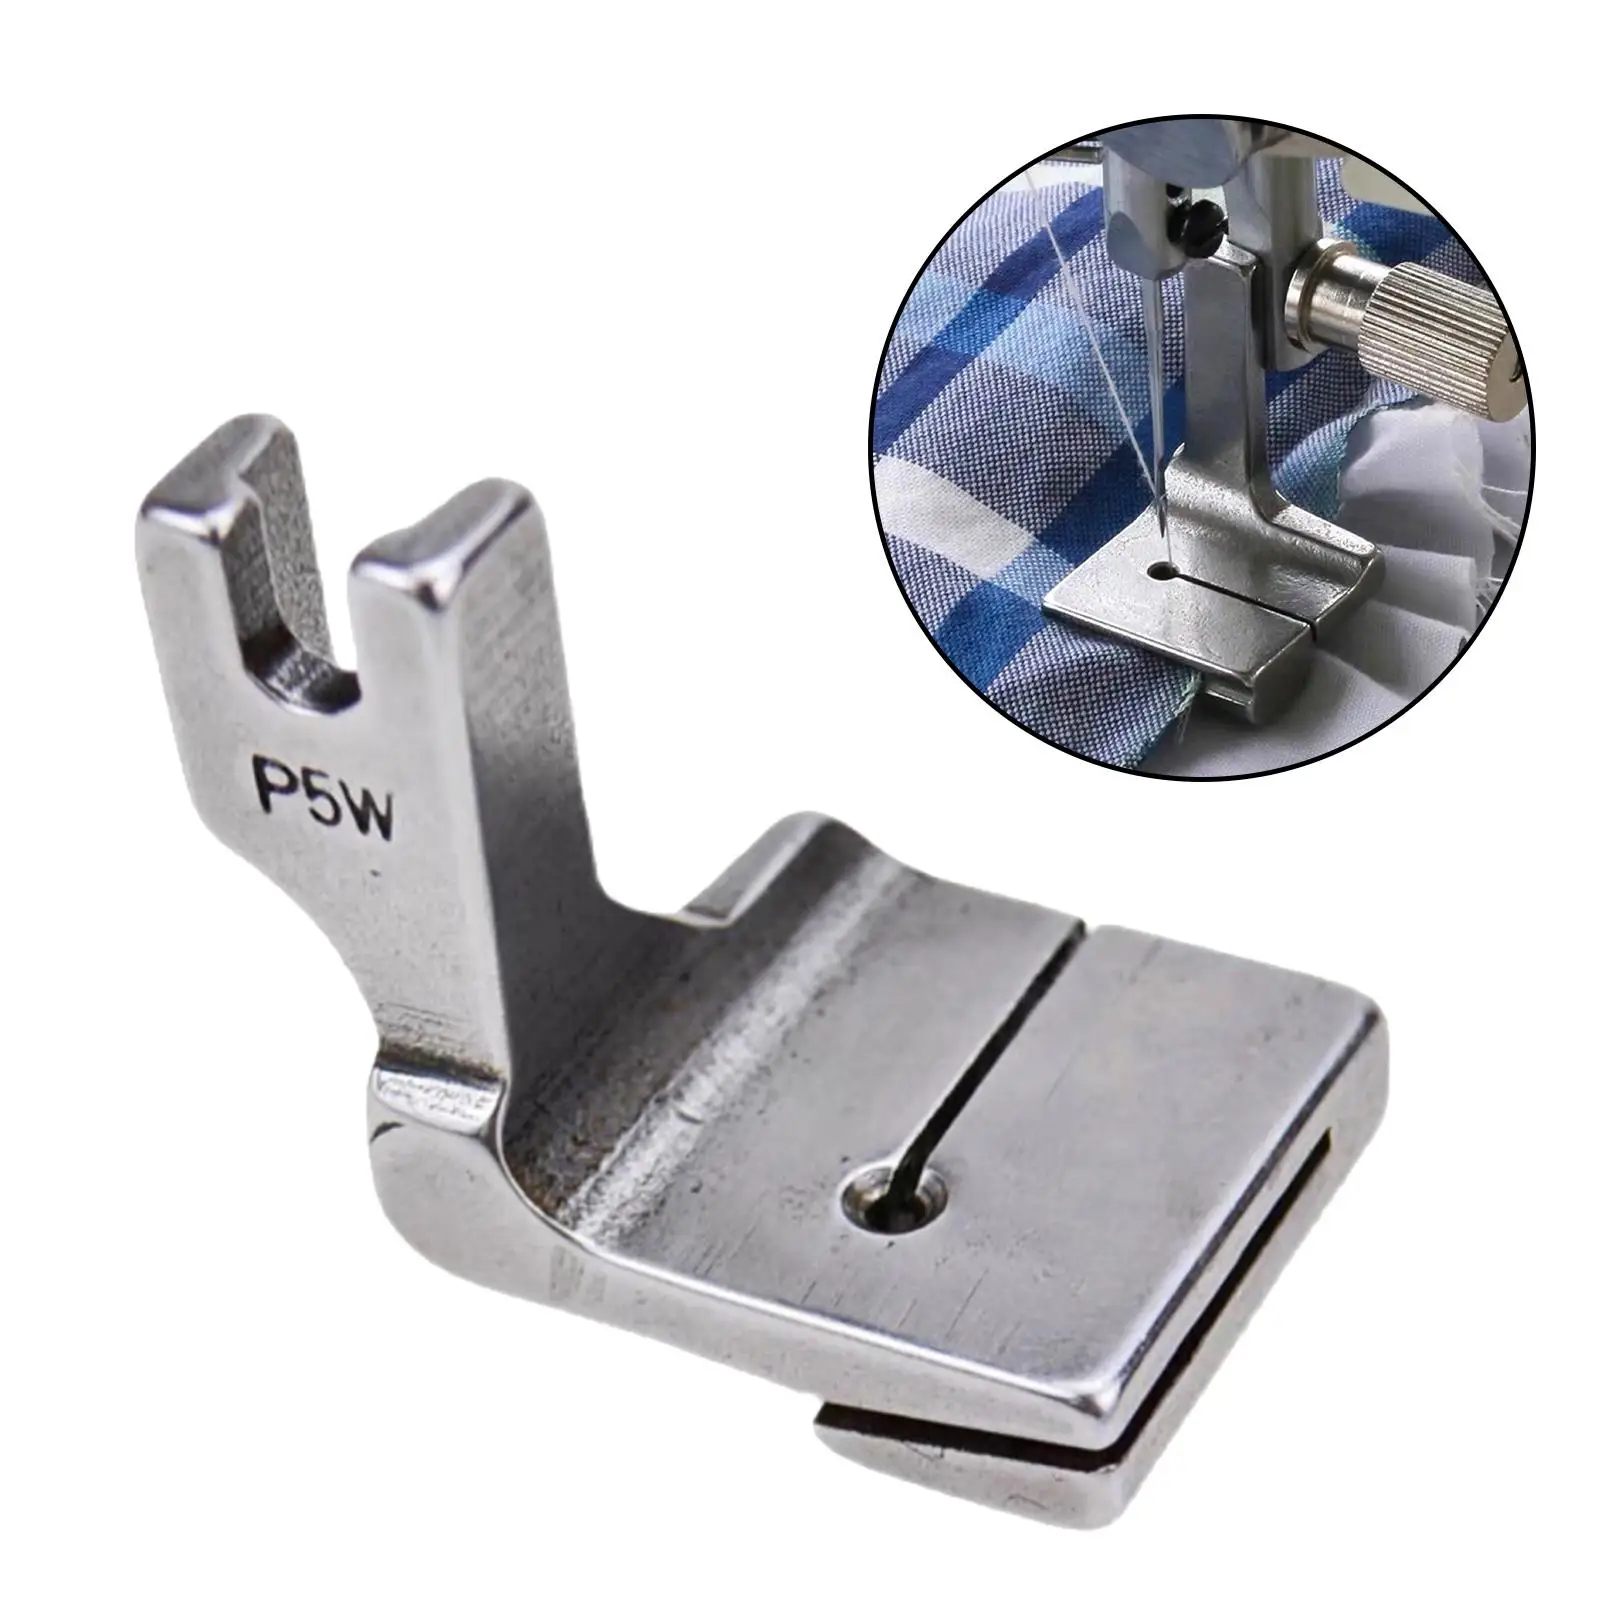 Wrinkled Pleated Presser Foot Replaces Cutting Dies Sewing Machine Parts P5W Presser Foot for Lockstitch Sewing Machine Accs